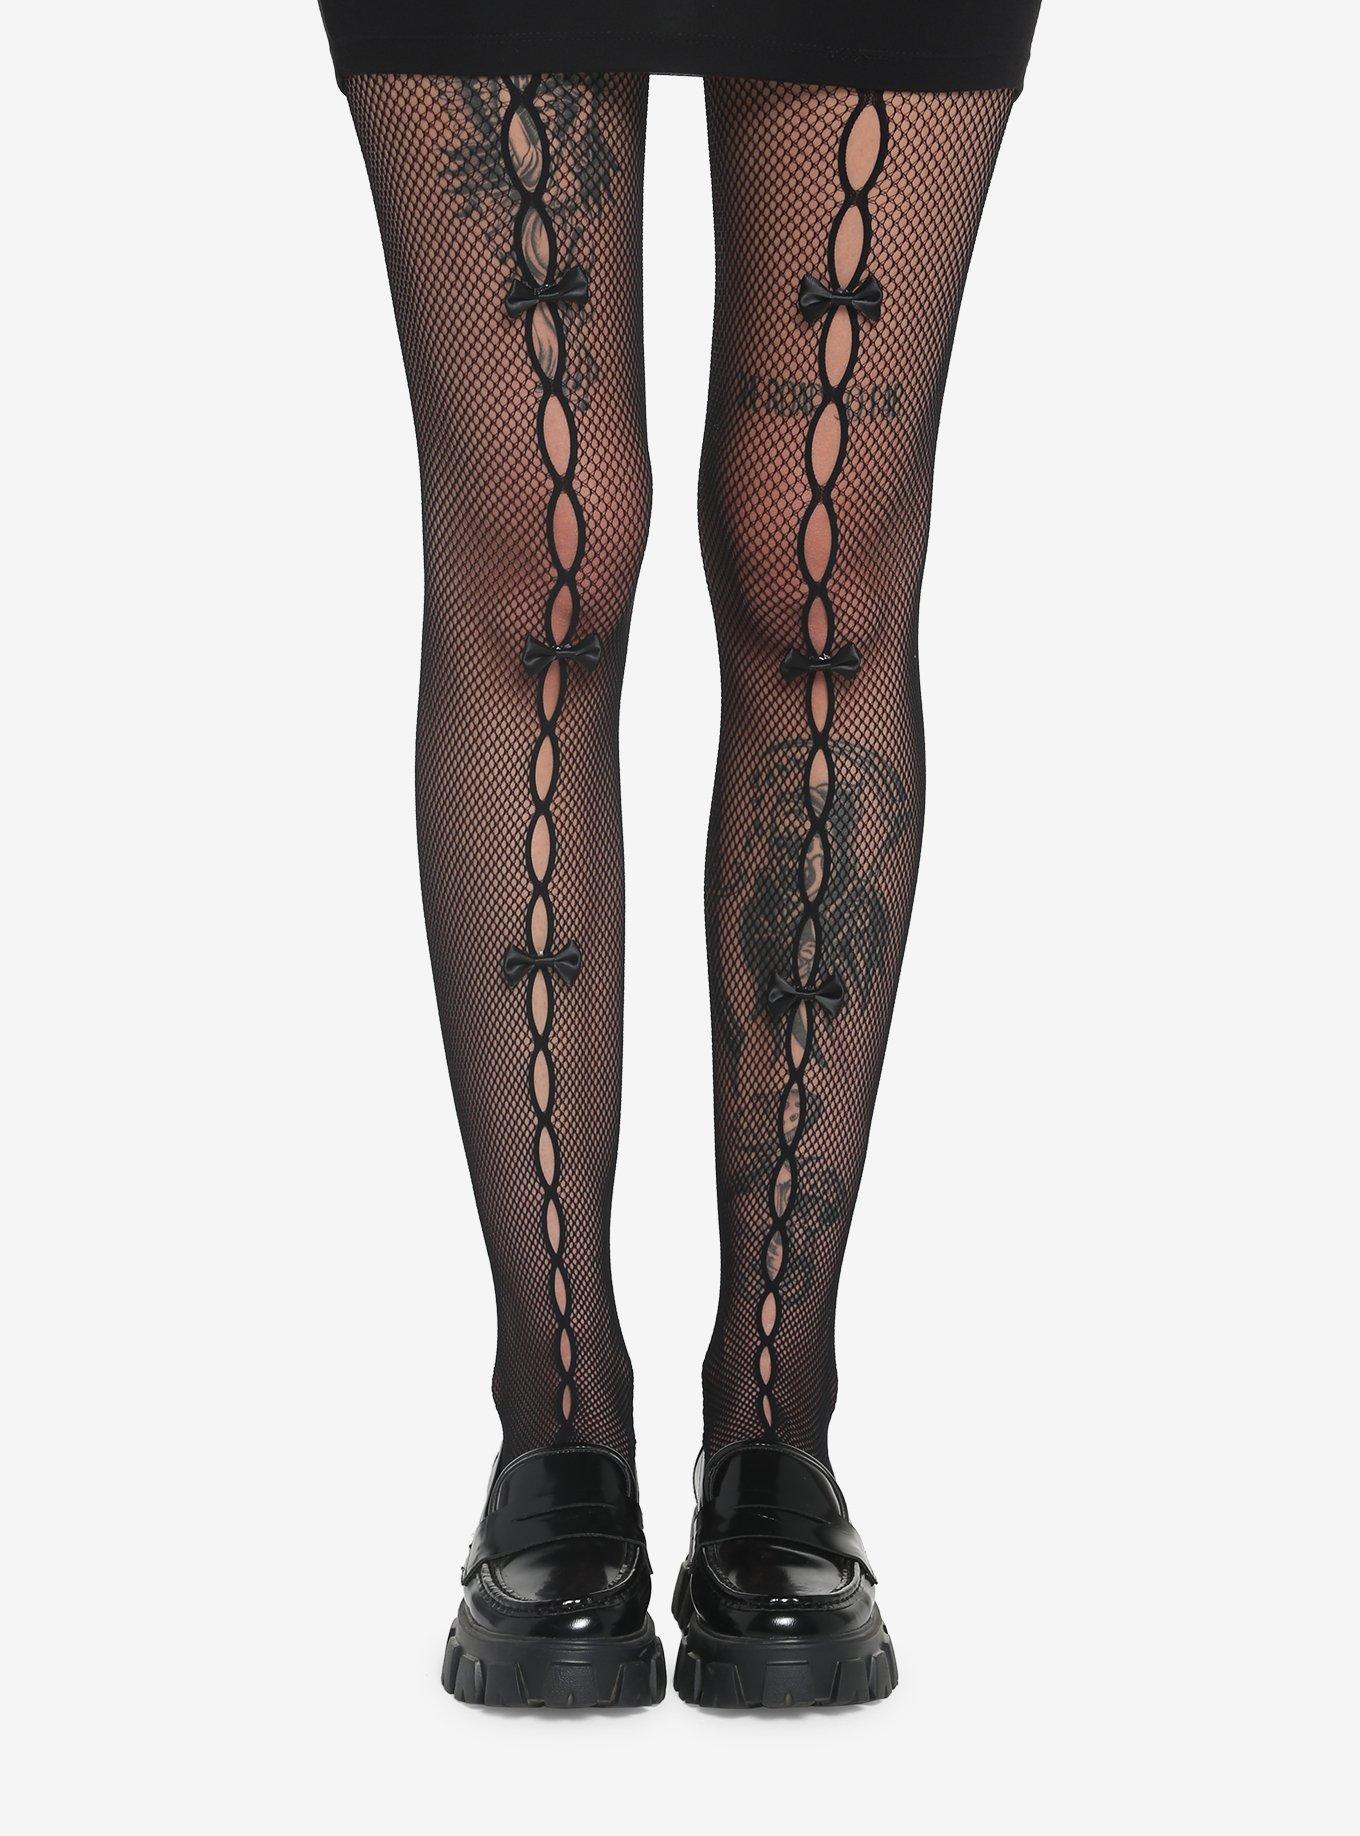 Urban Outfitters Bow-trimmed Fishnet Tight in Black